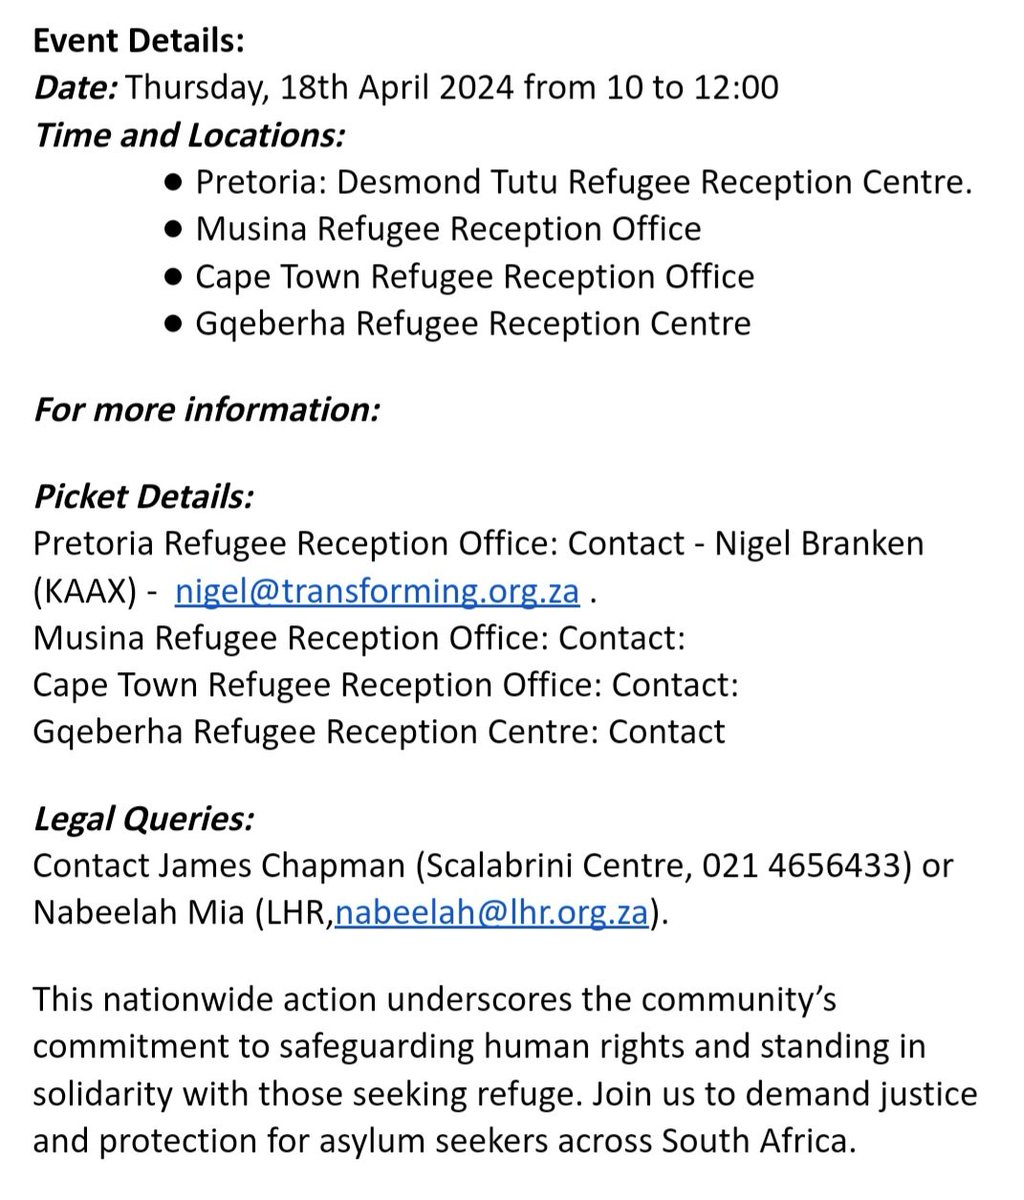 Media Alert: Nationwide Picket at Refugee Reception Offices Scheduled for 18th April 2024.